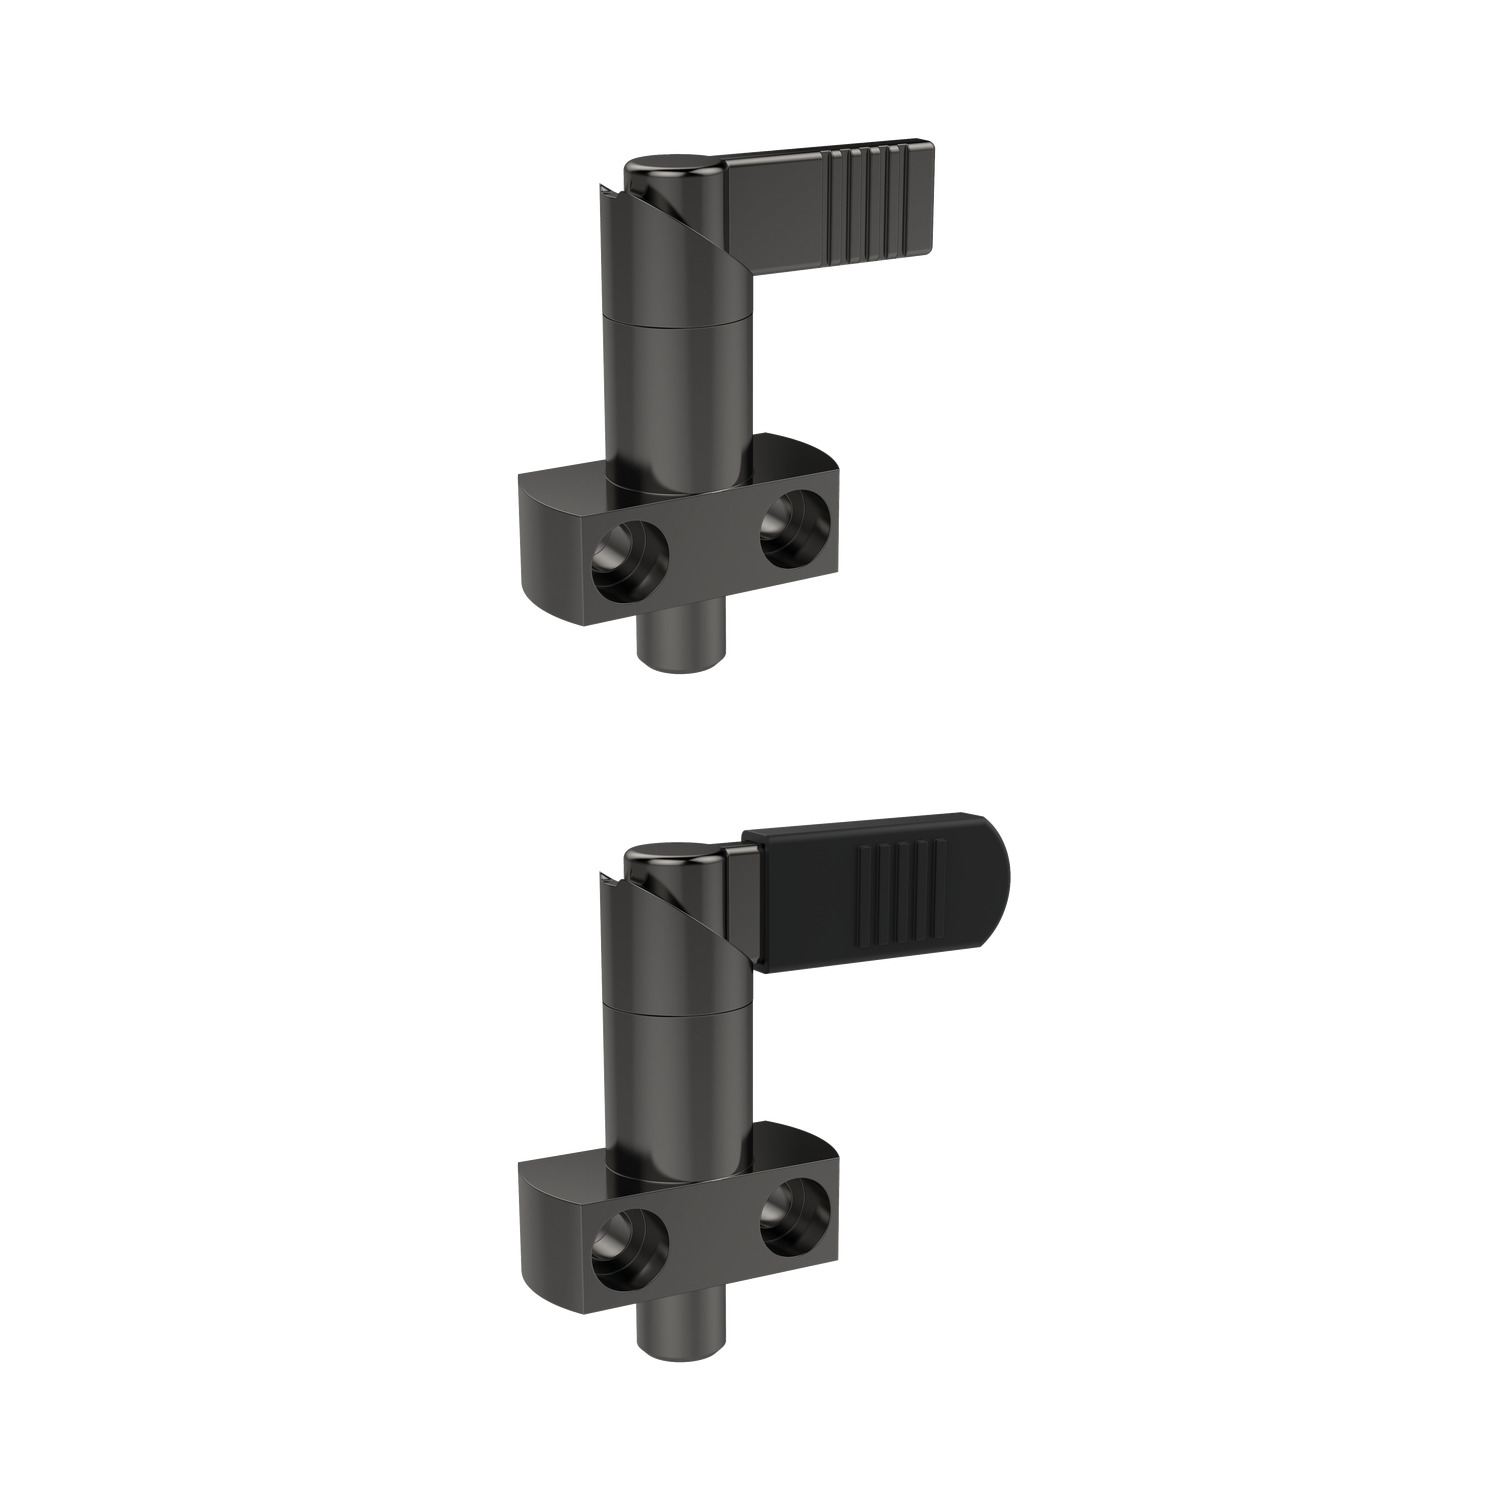 32520.W0391 Index Plungers - Lever Grip - Steel. With Grip - 10 - 10 - 16